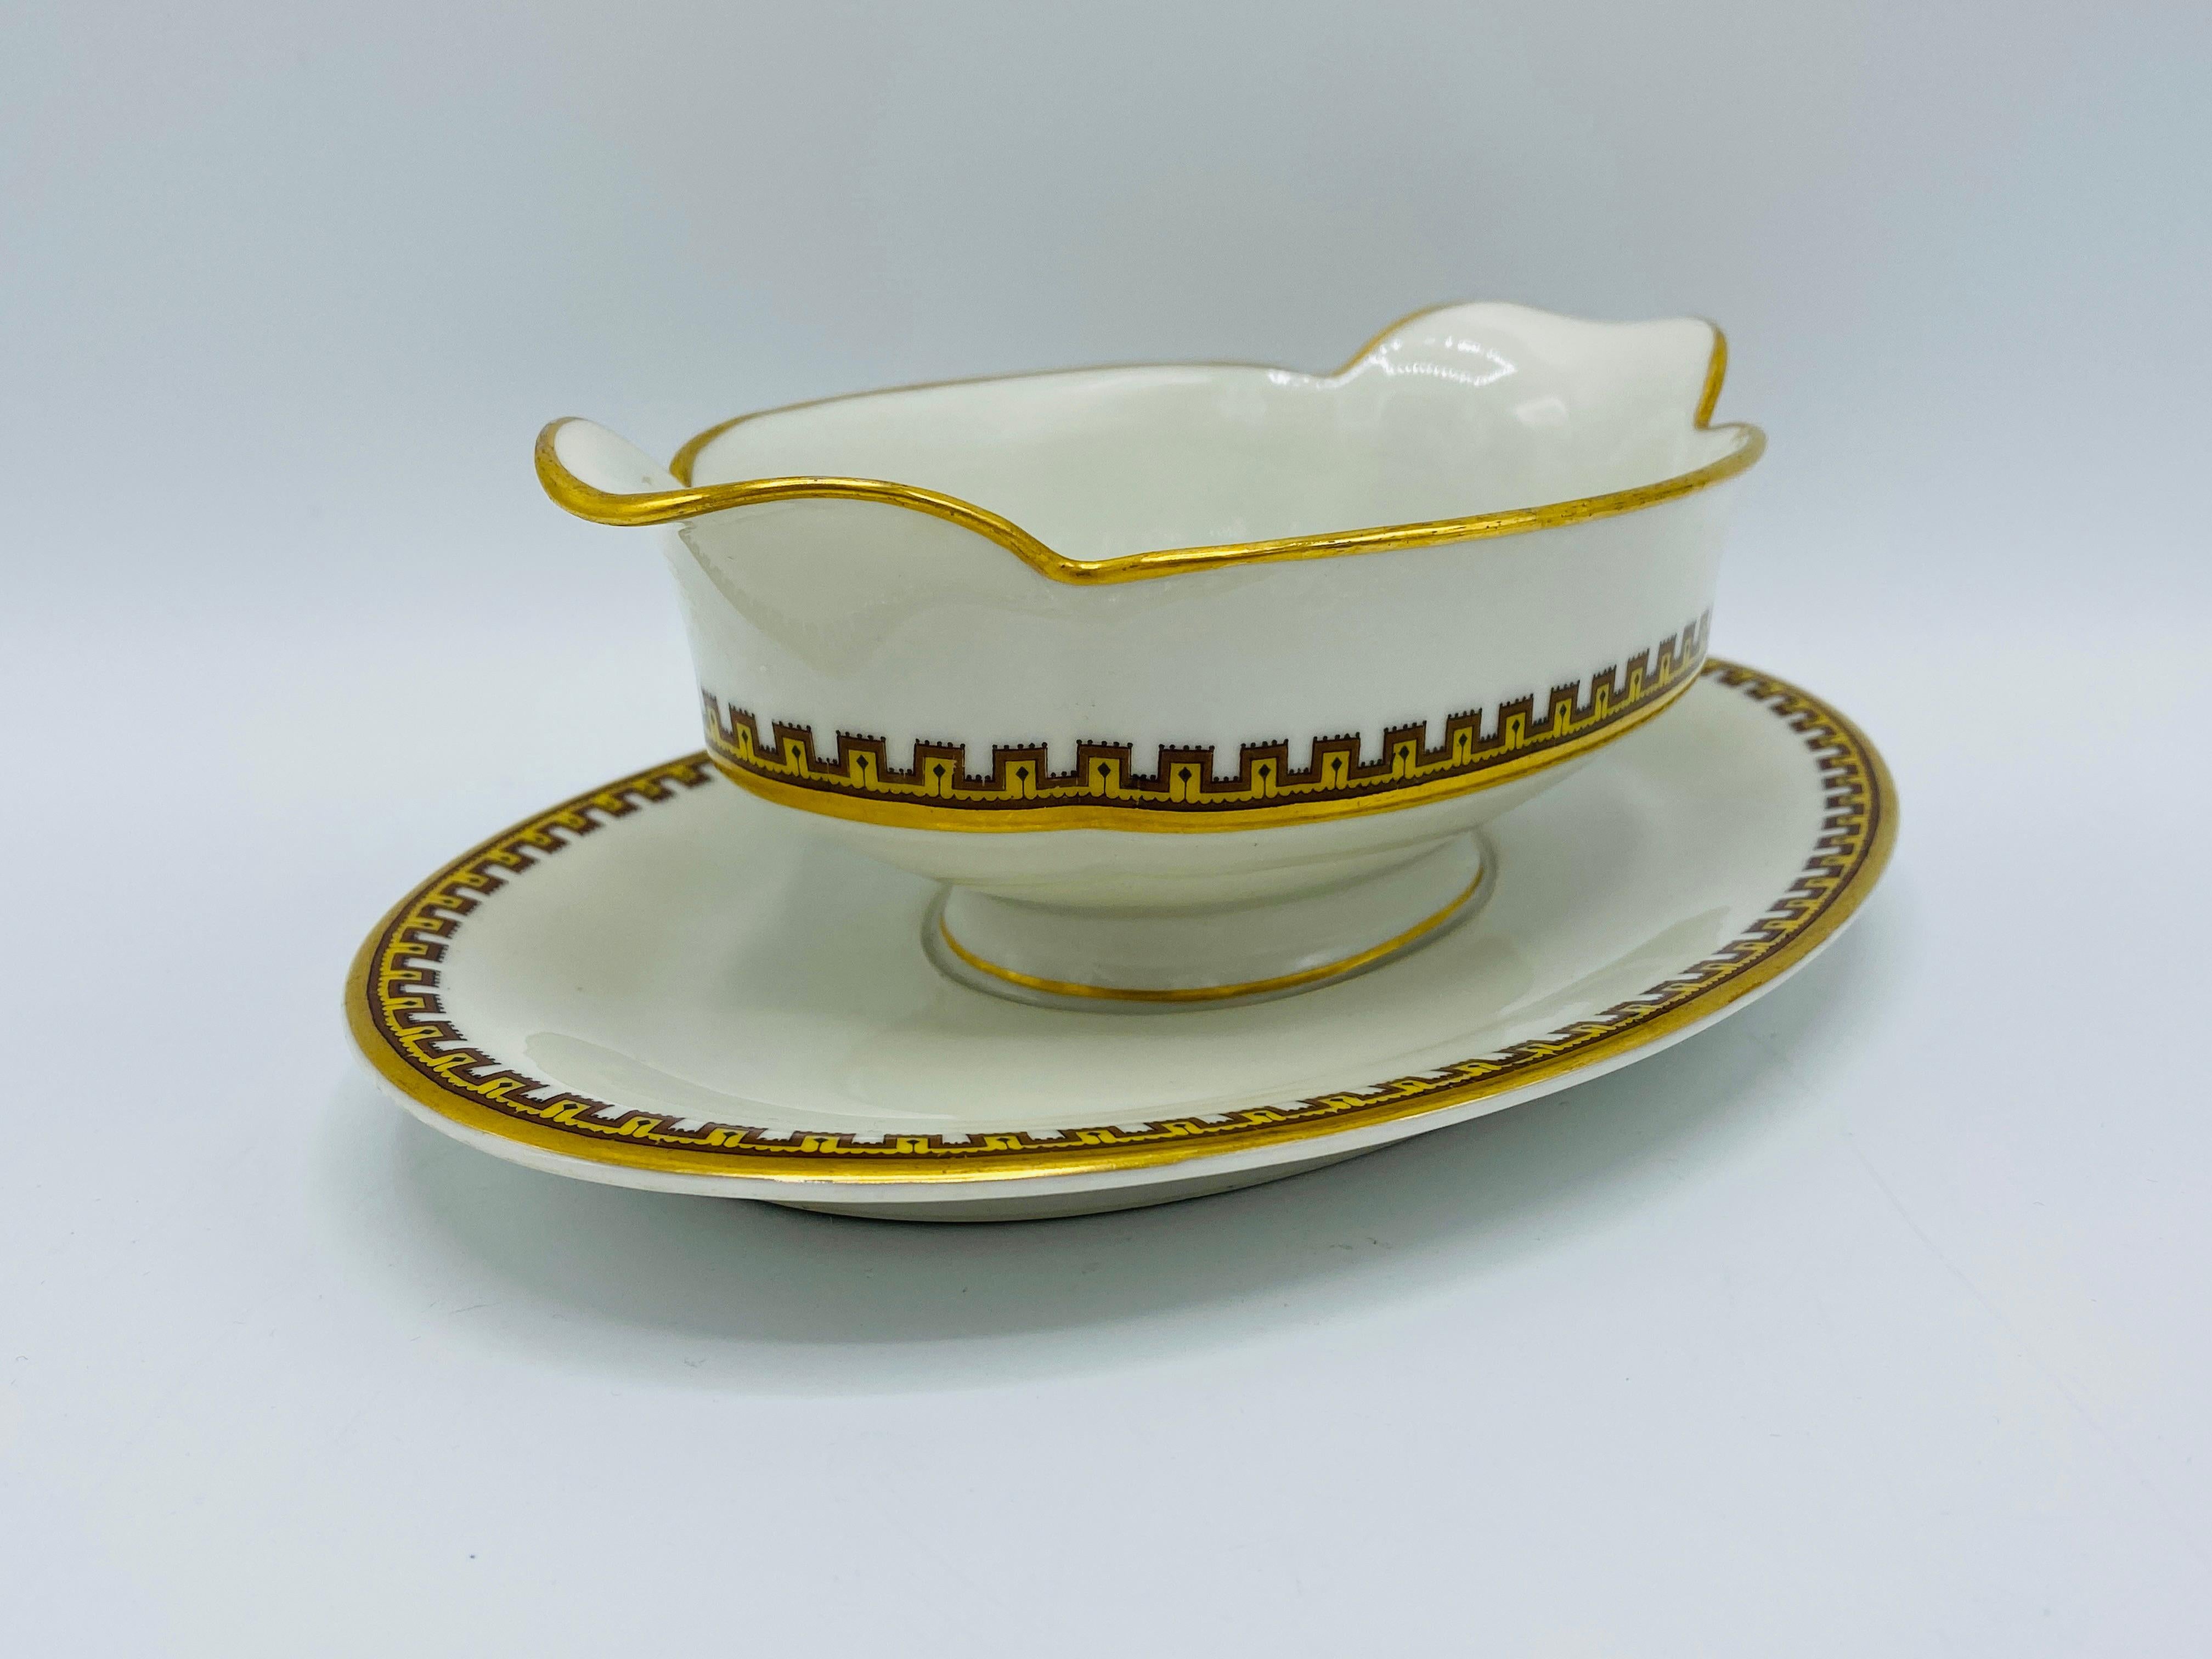 Listed is a stunning, Haviland & Co. for Limoges France saucière gravy boat, circa 1950s. The piece is in the highly sought after 'Schleiger 962 - H SCH962' greek key geometric pattern. An elegant and sophisticated china pattern, with golden yellow